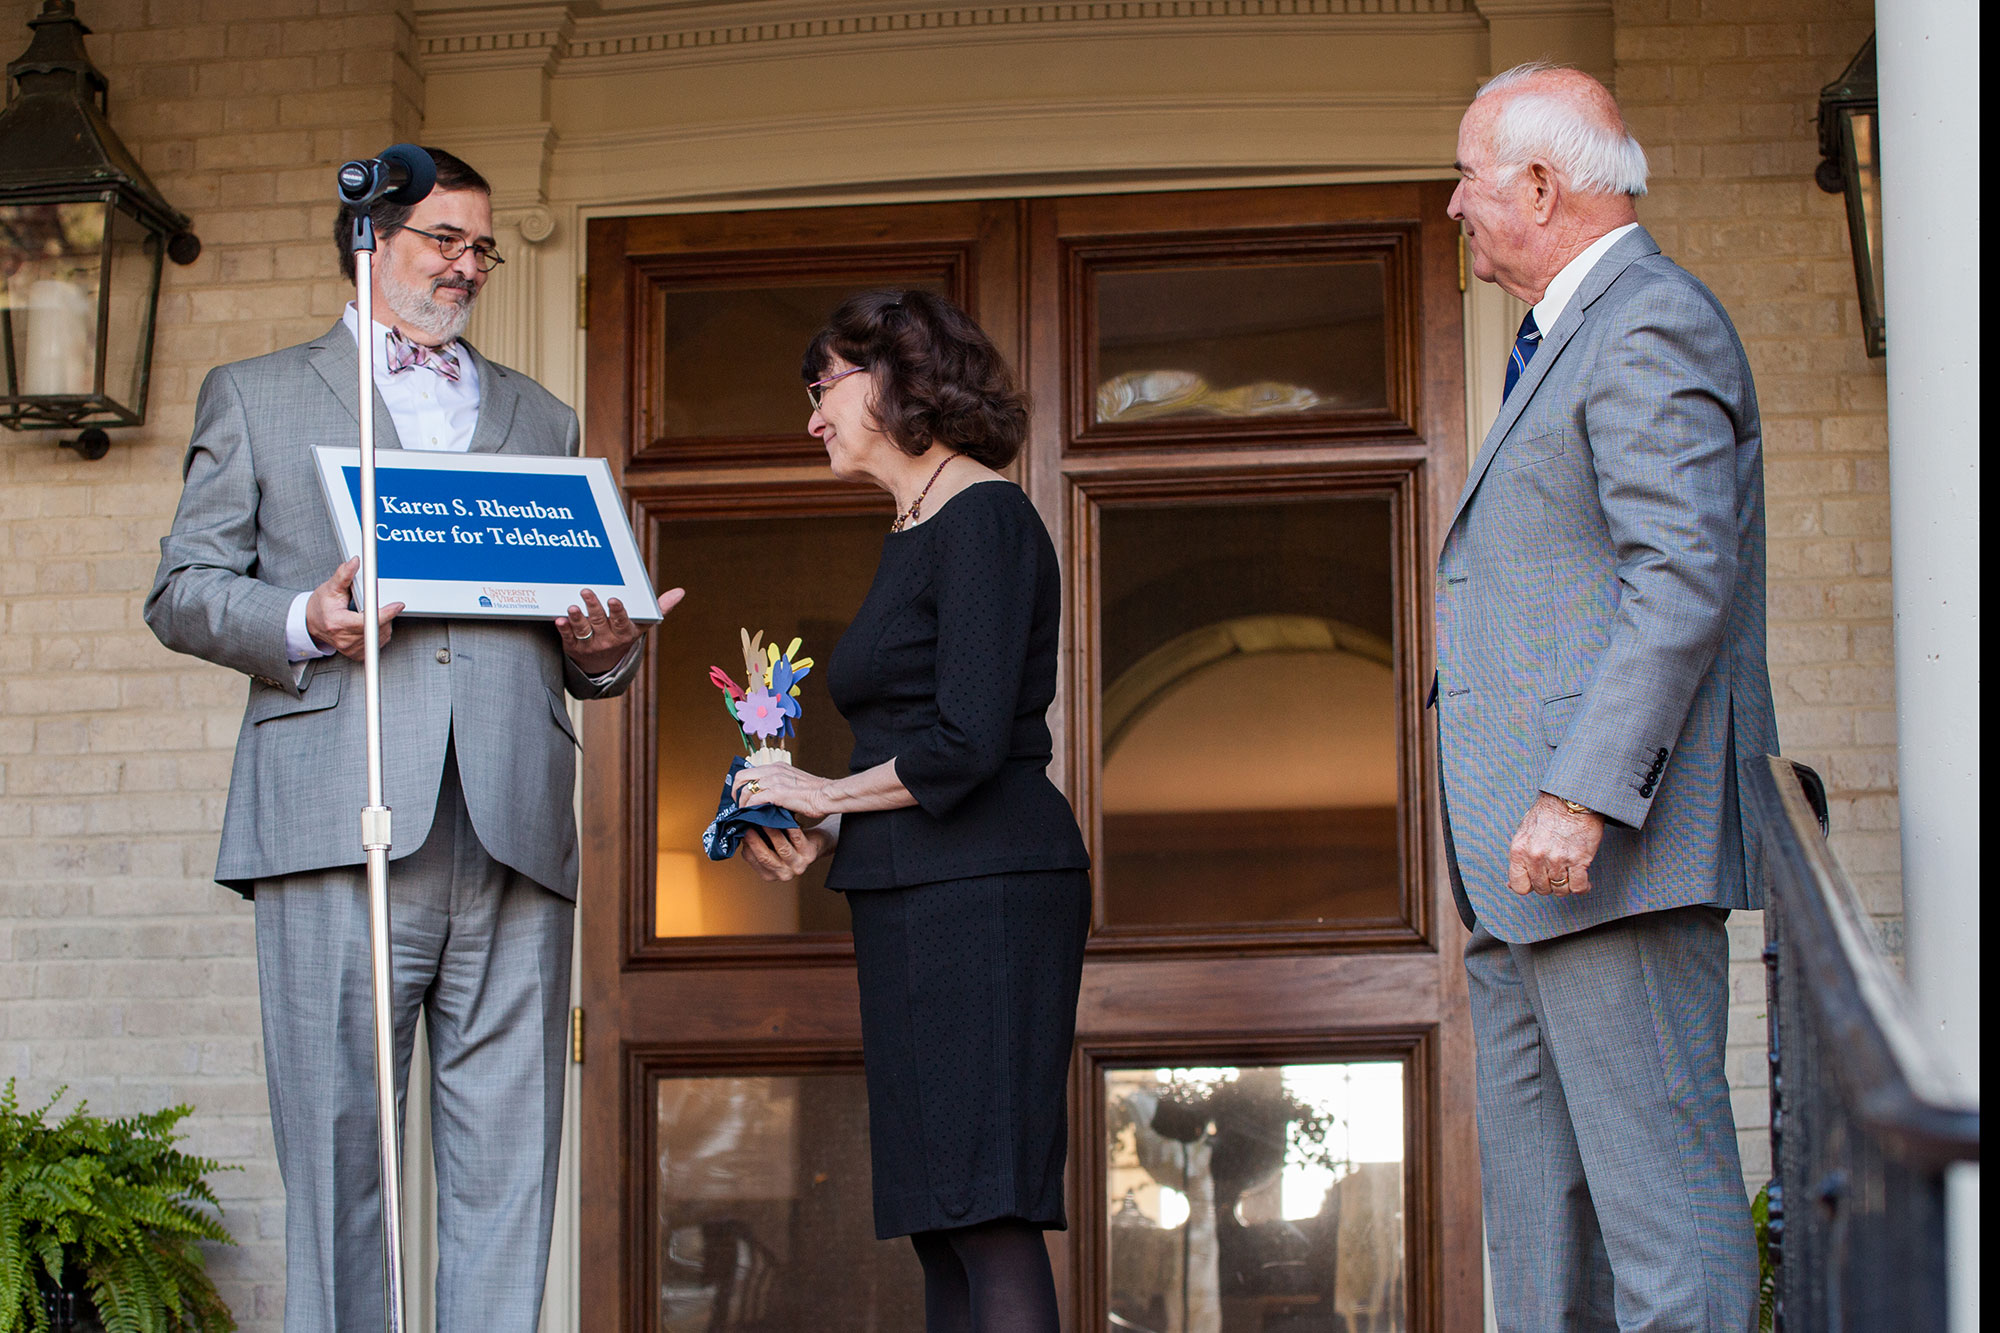 The UVA Health System celebrated telemedicine pioneer Karen S. Rheuban by naming its Center for Telehealth in her honor.